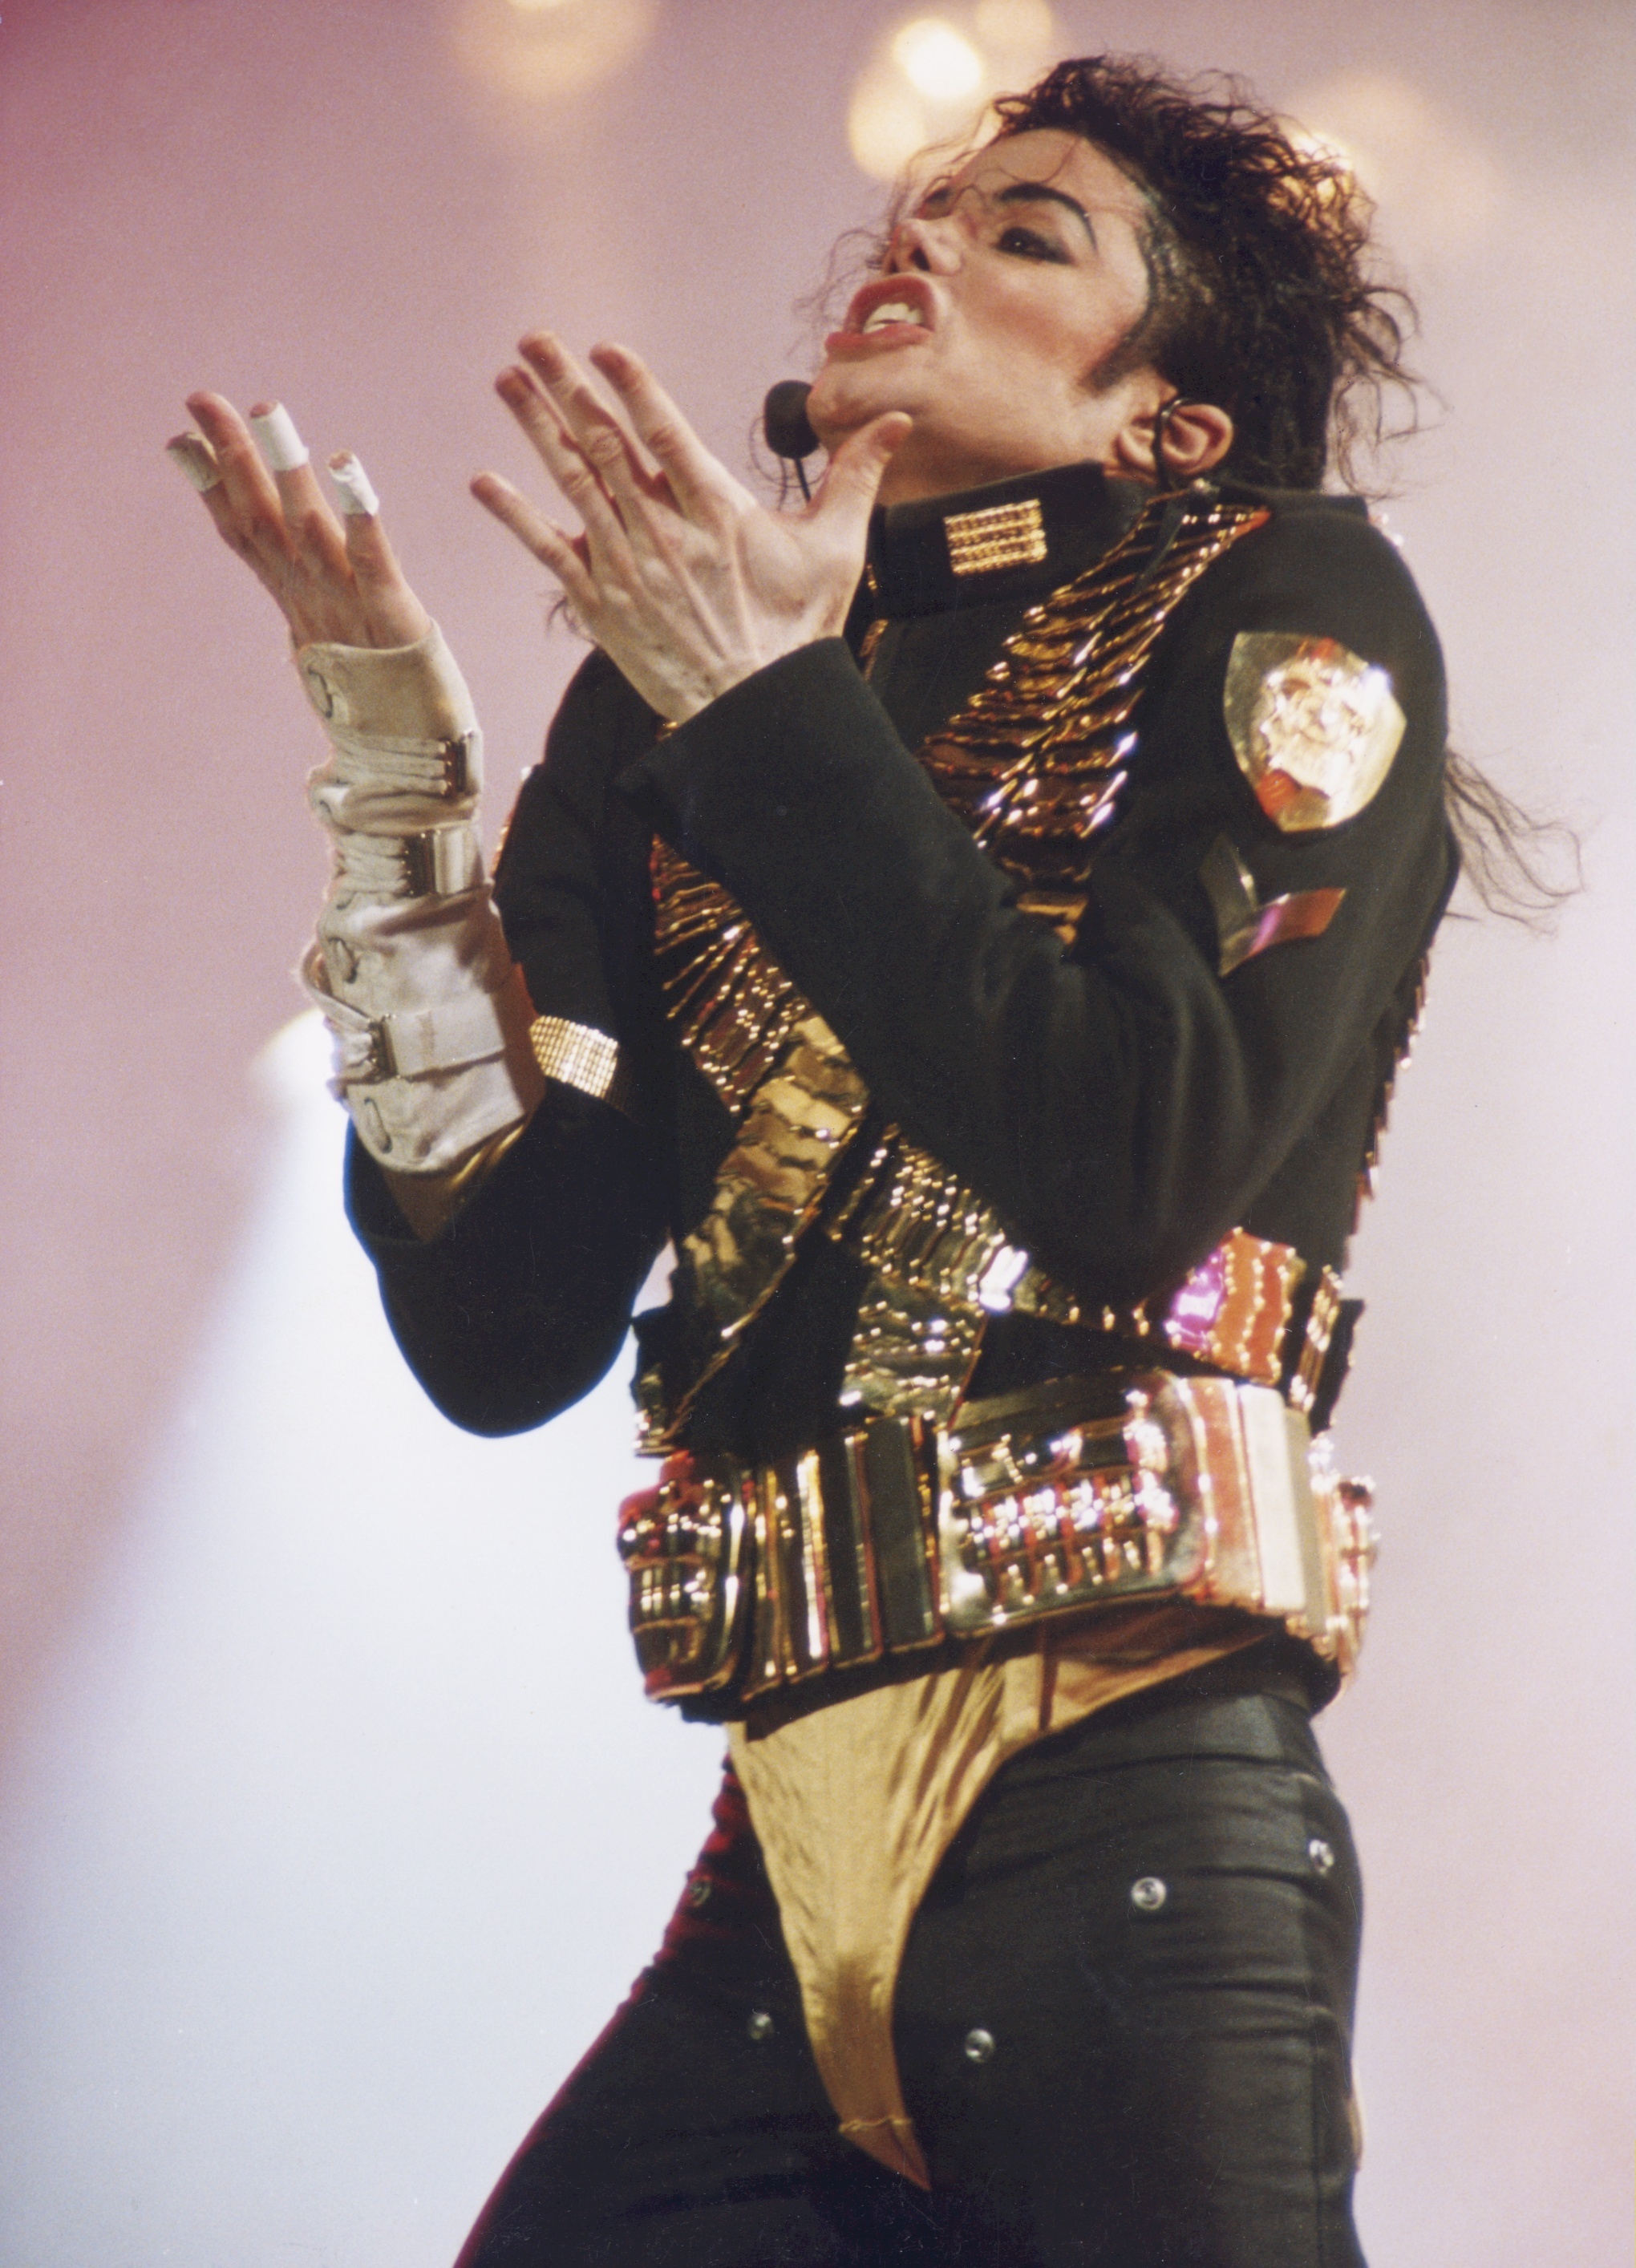 Michael Jackson performs on stage sporting bandages on three fingers of his right hand in 1993 | Source: Getty Images